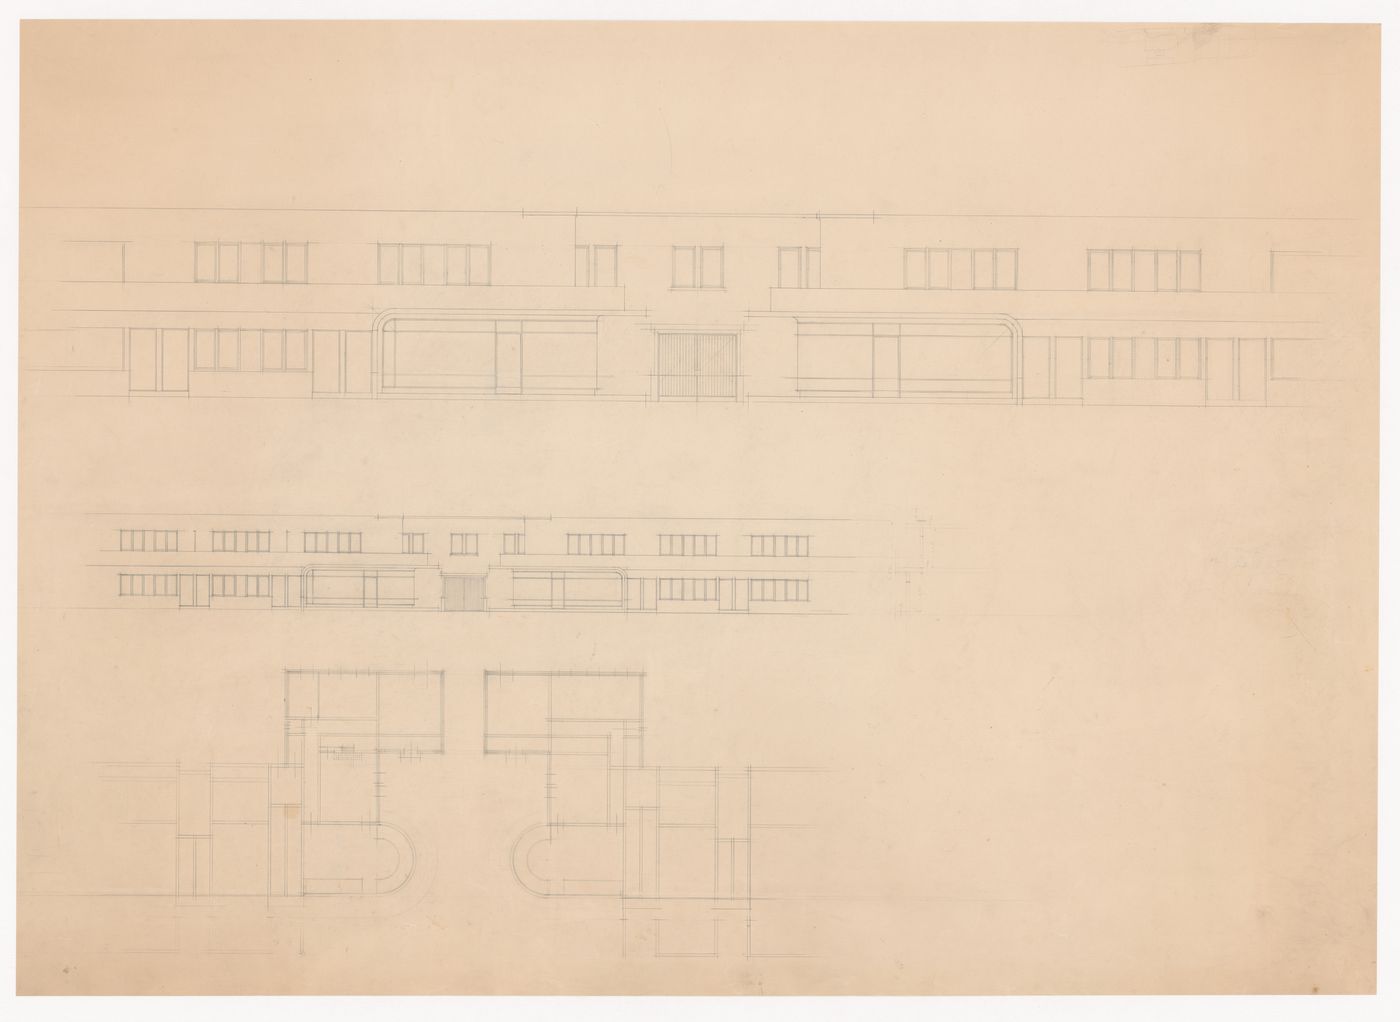 Plans and elevations for the central unit and warehouse for industrial row houses, Hoek van Holland, Netherlands